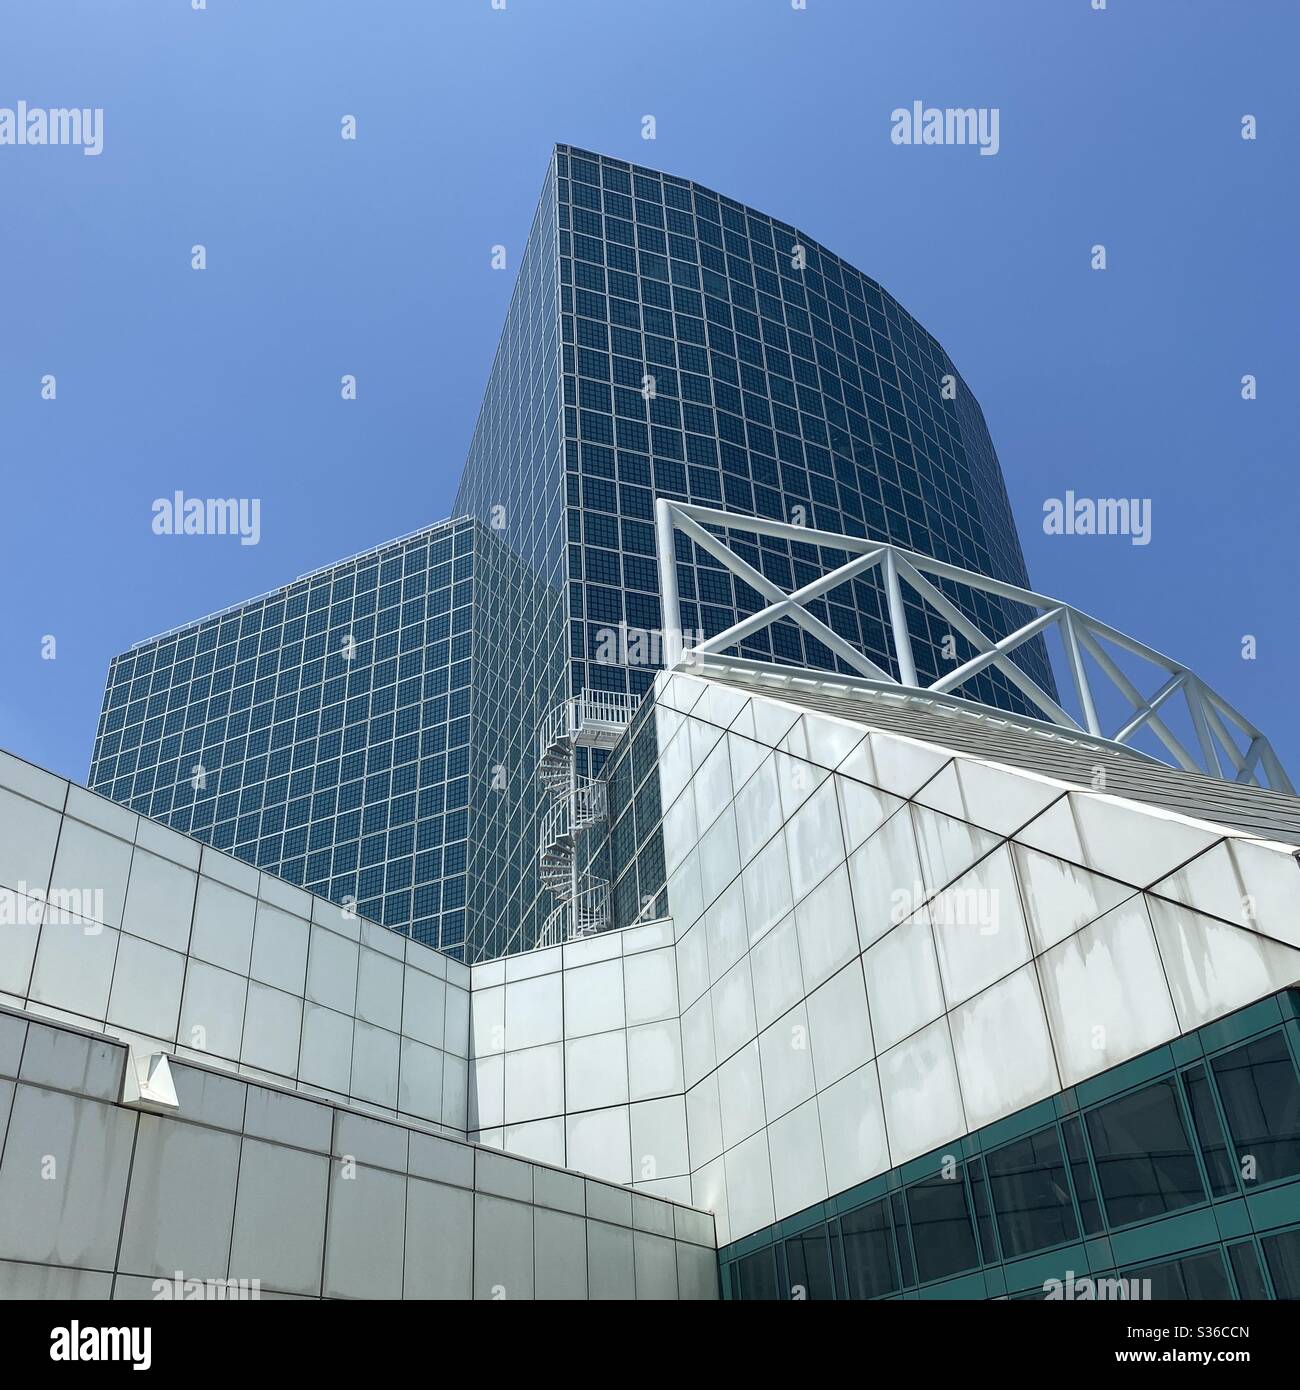 LOS ANGELES, CA, MAY 2020: close view of the architecture at Los Angeles Convention Center in South Park District of Downtown Stock Photo